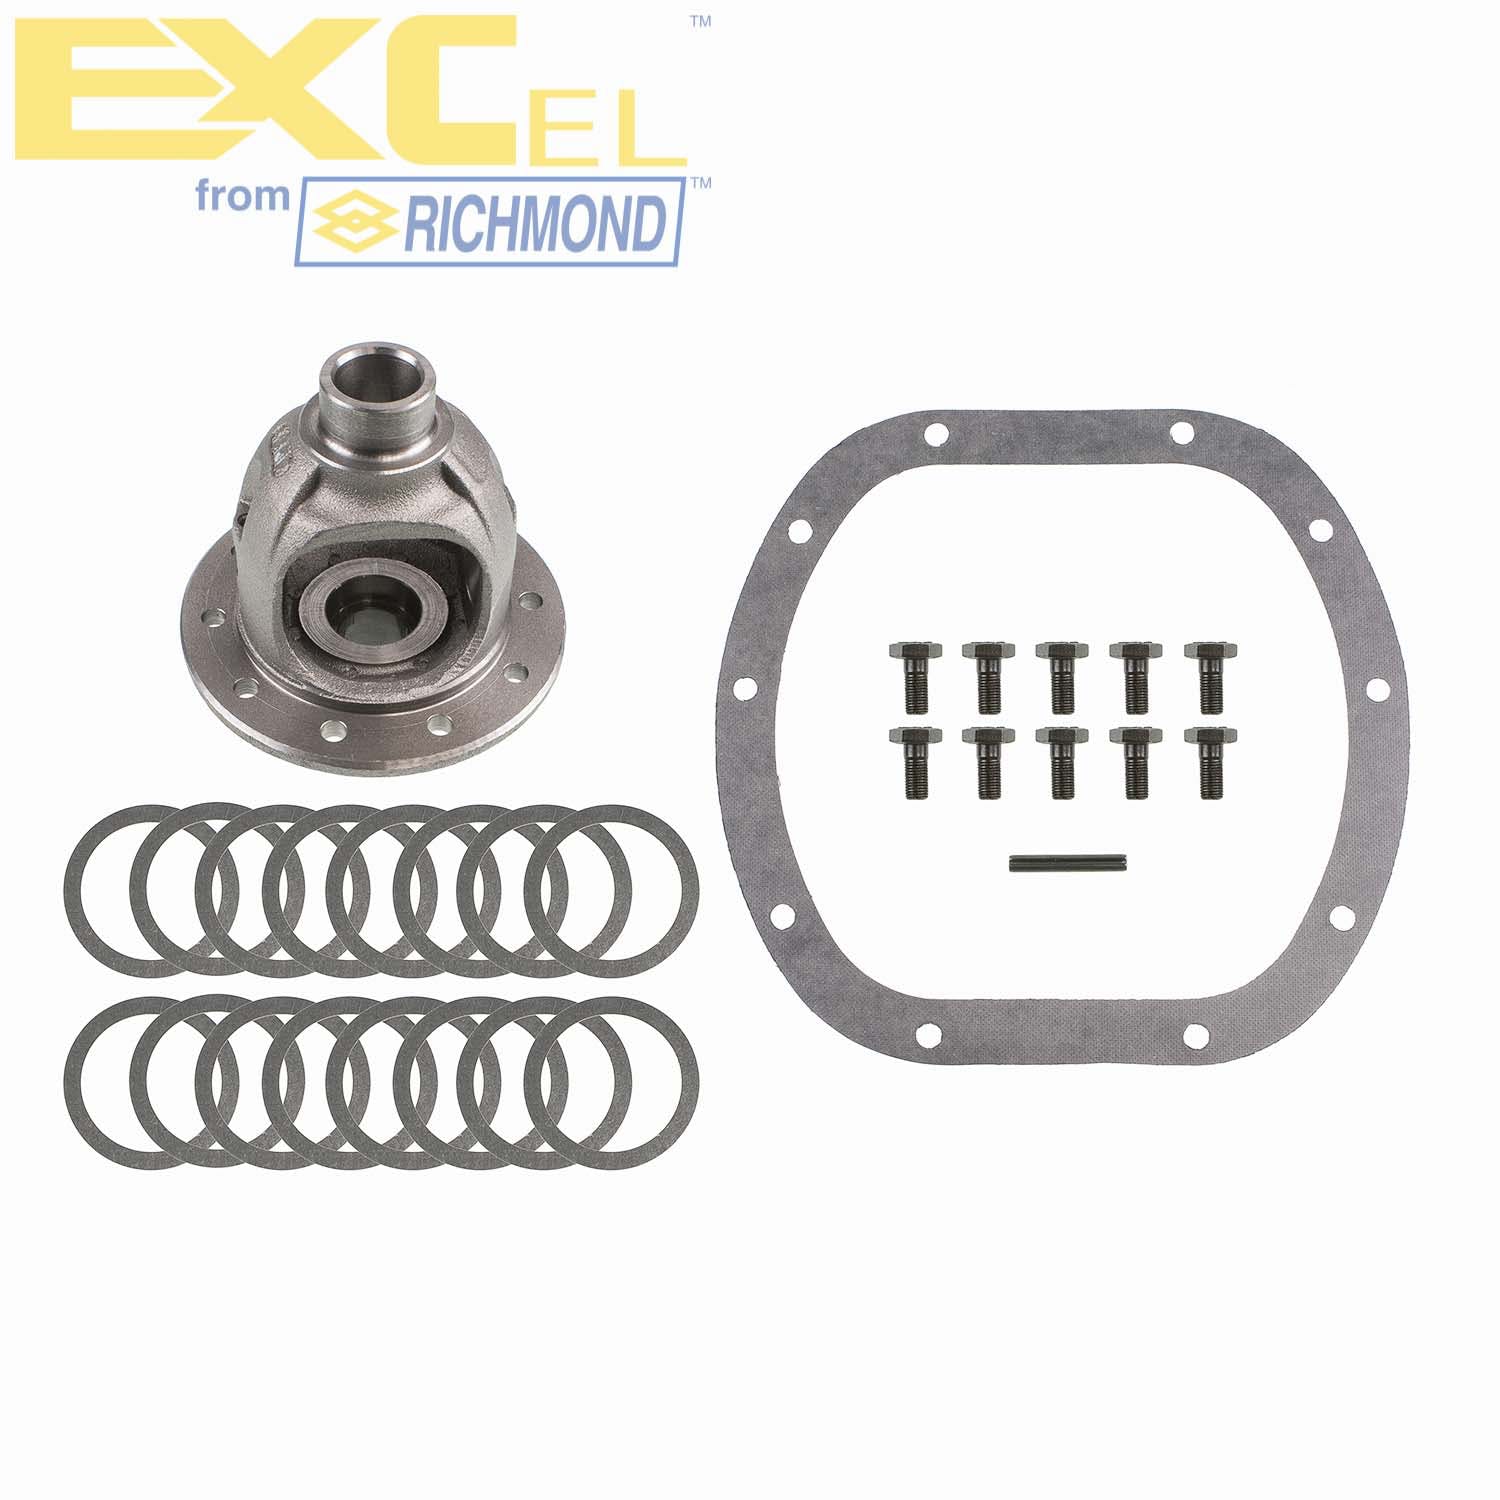 Excel XL-5005 Differential Carrier